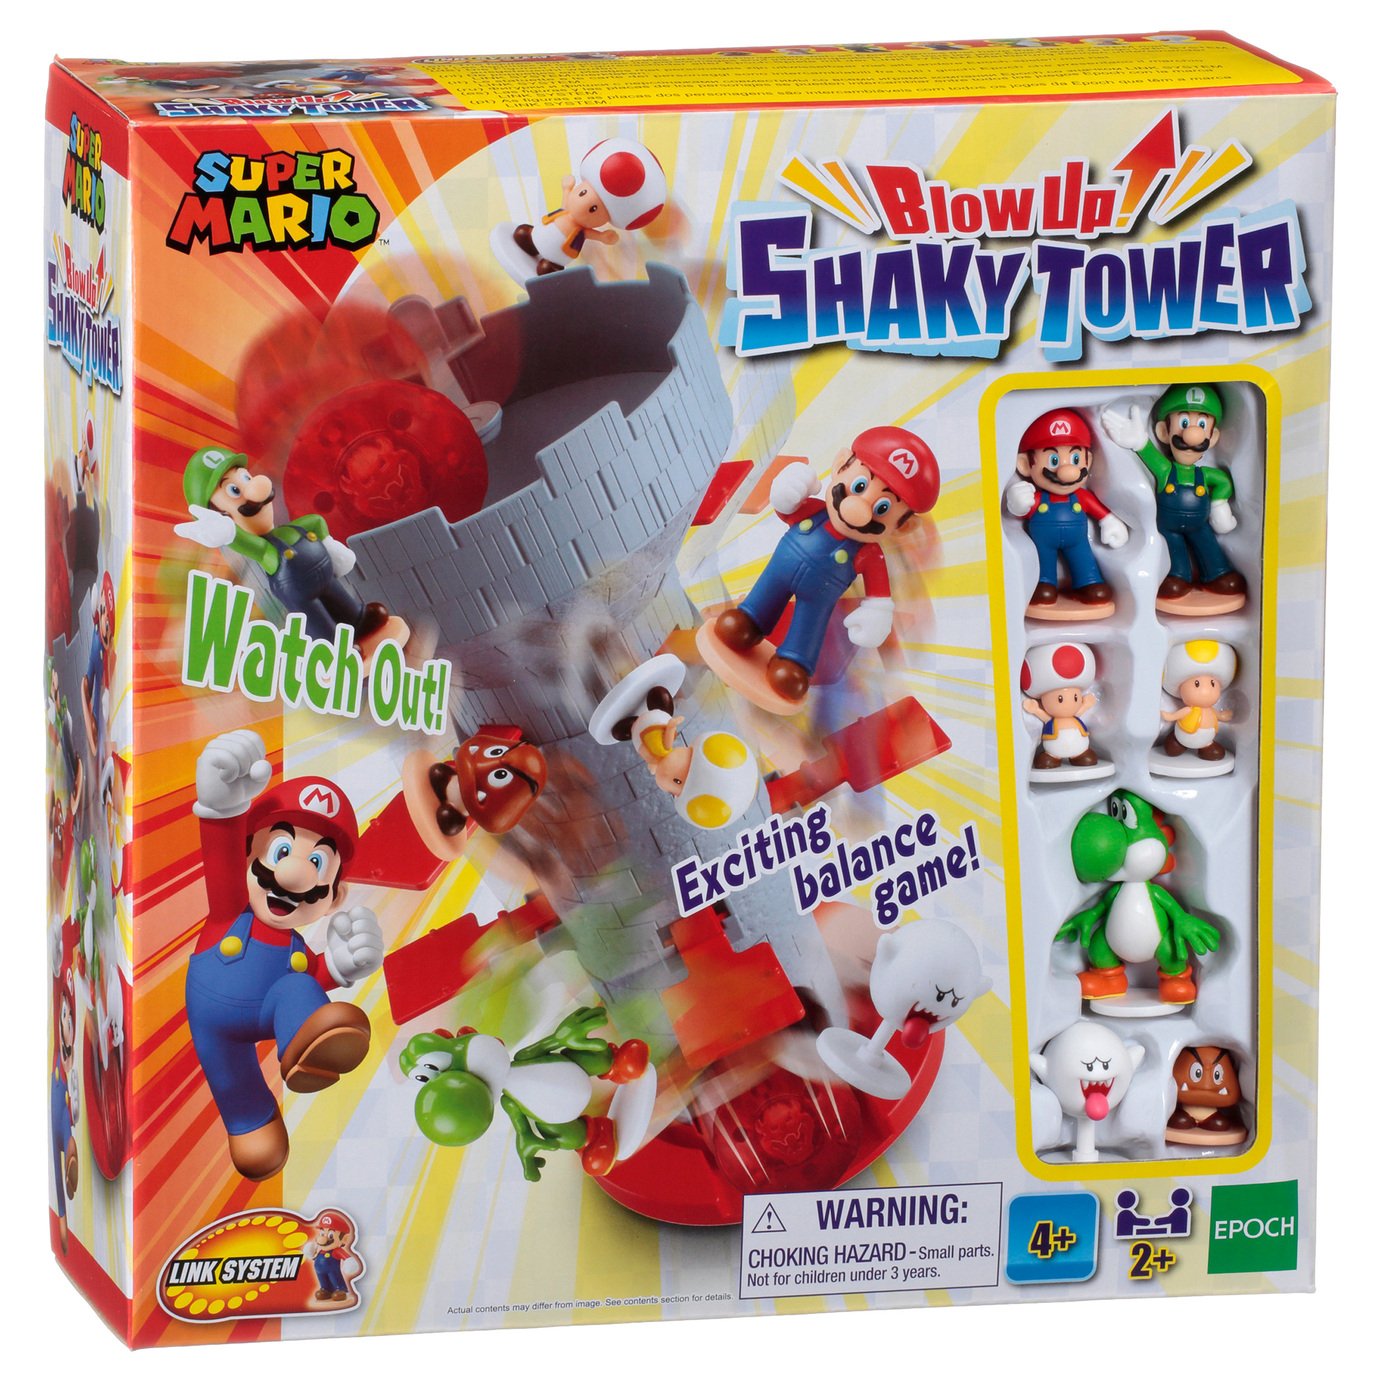 Super Mario Blow Up Shaky Tower review